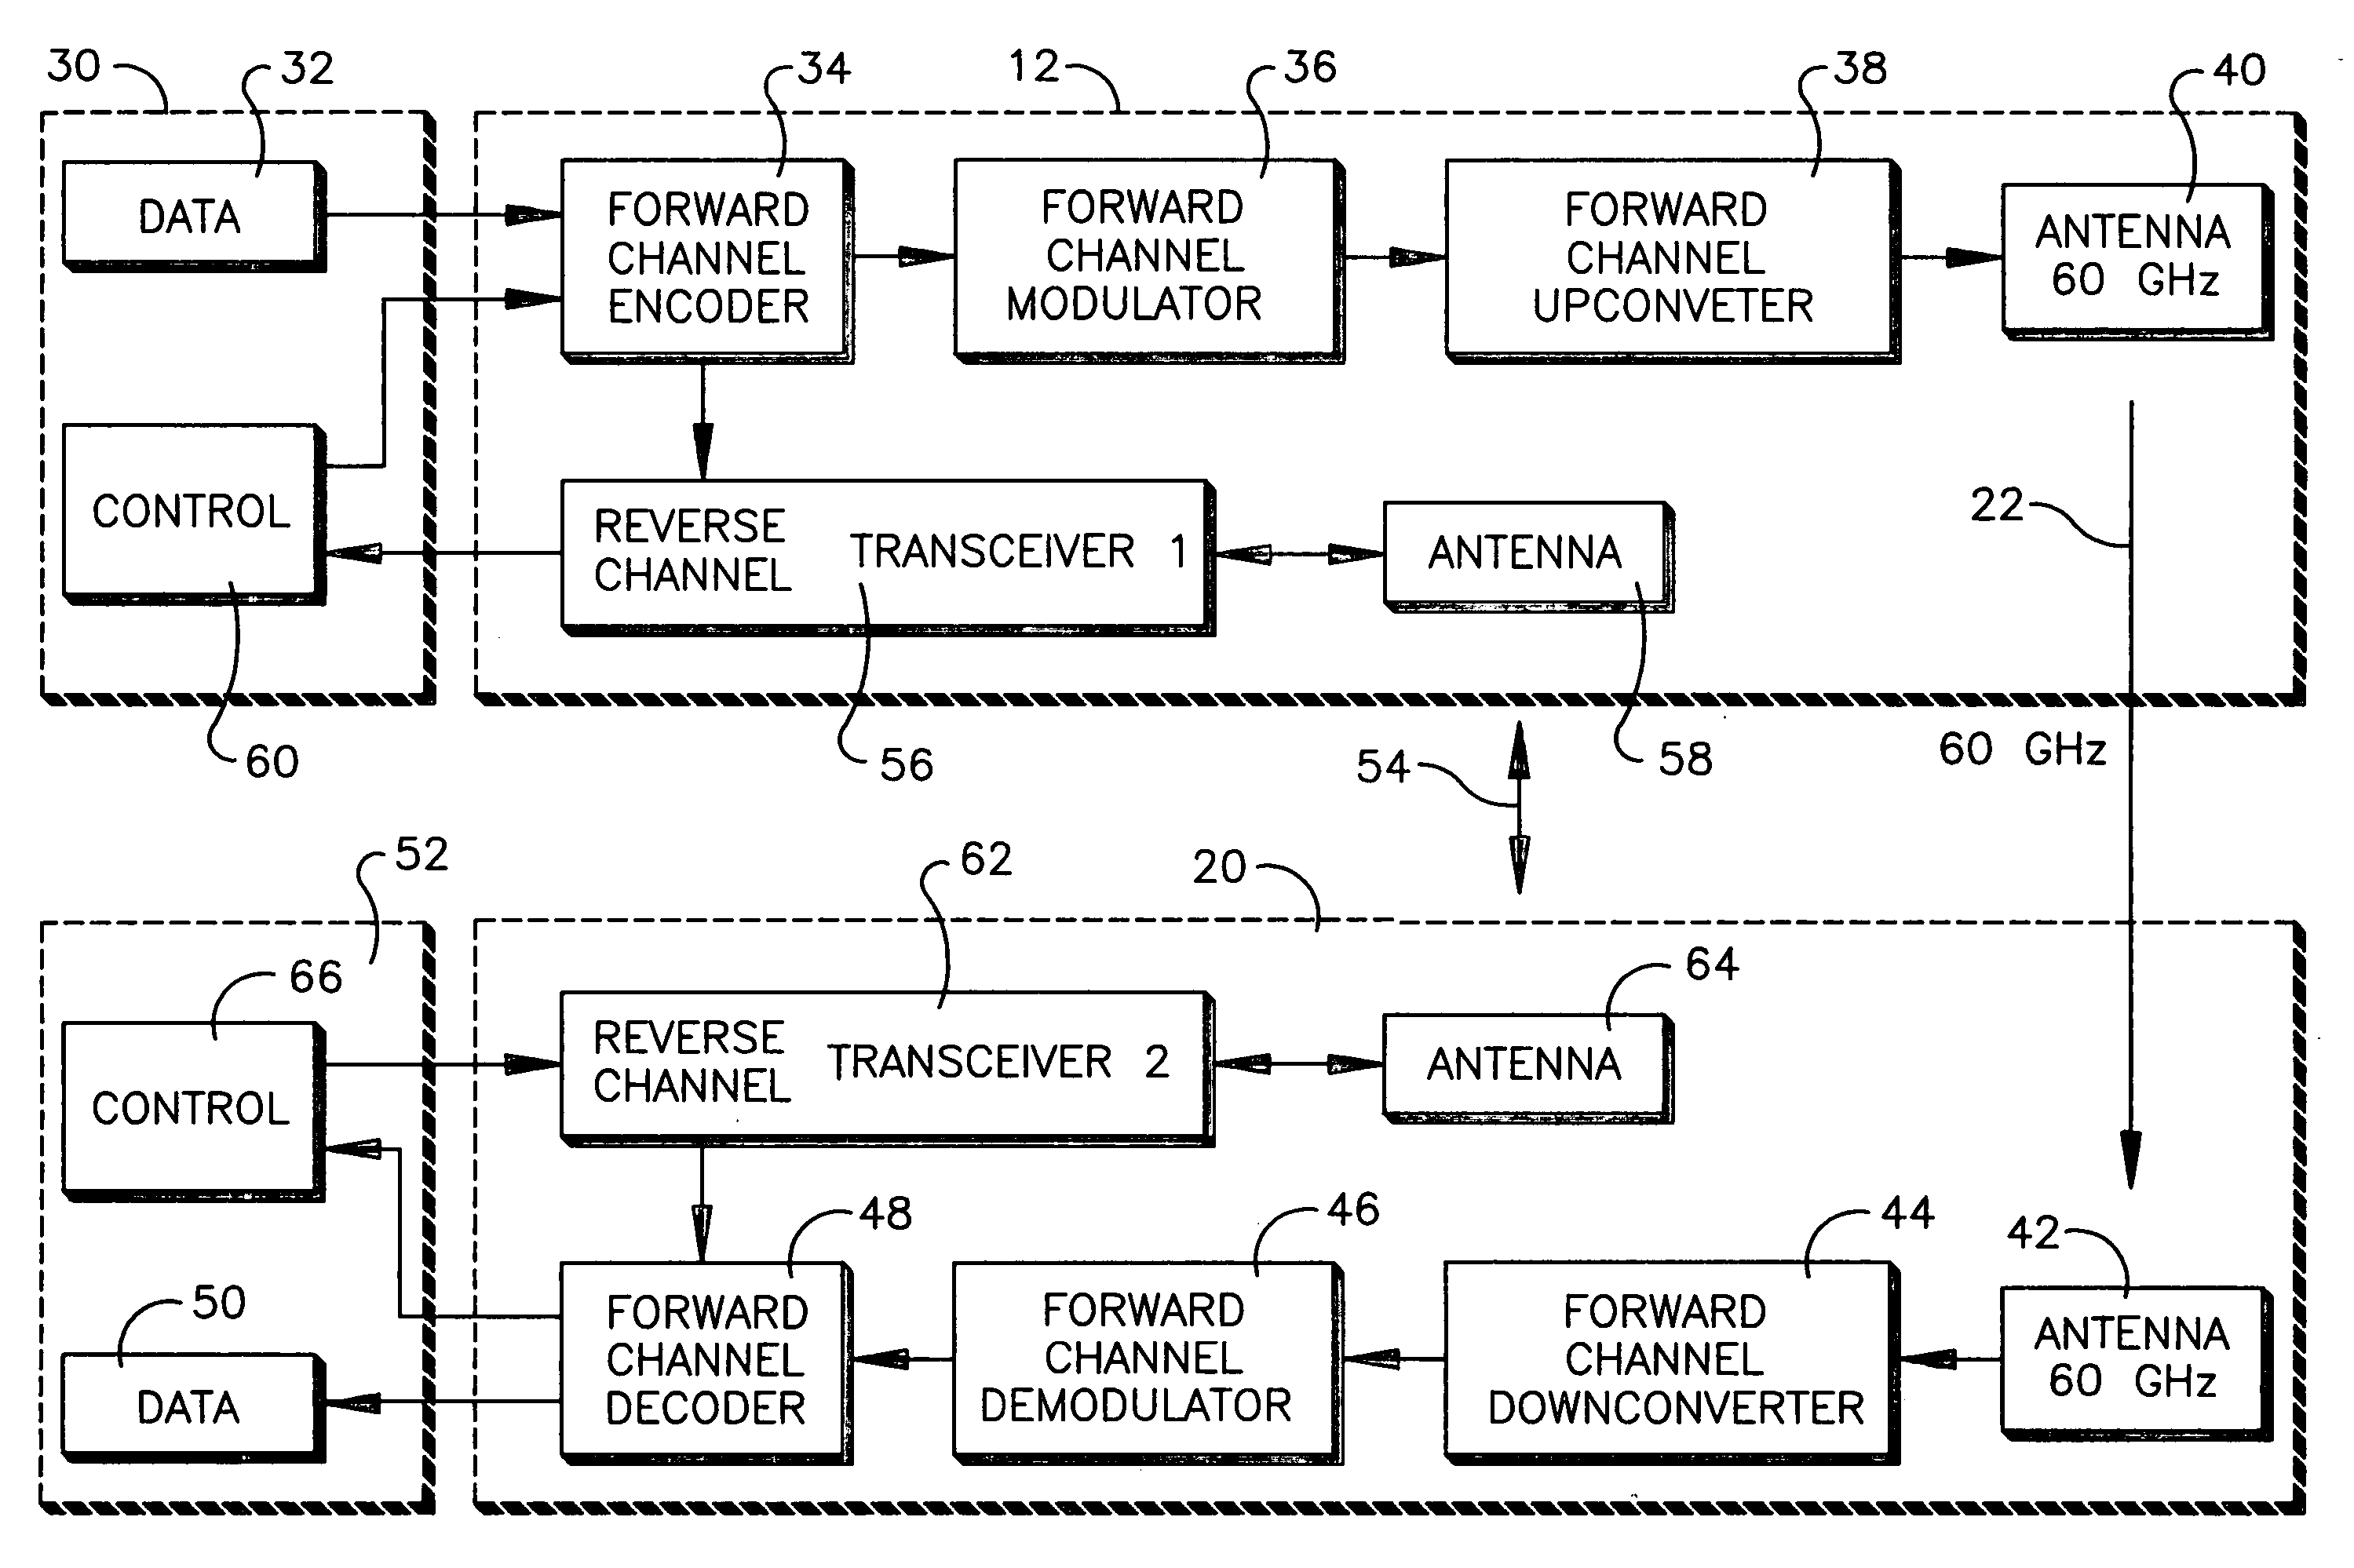 Method and system for wireless digital communication